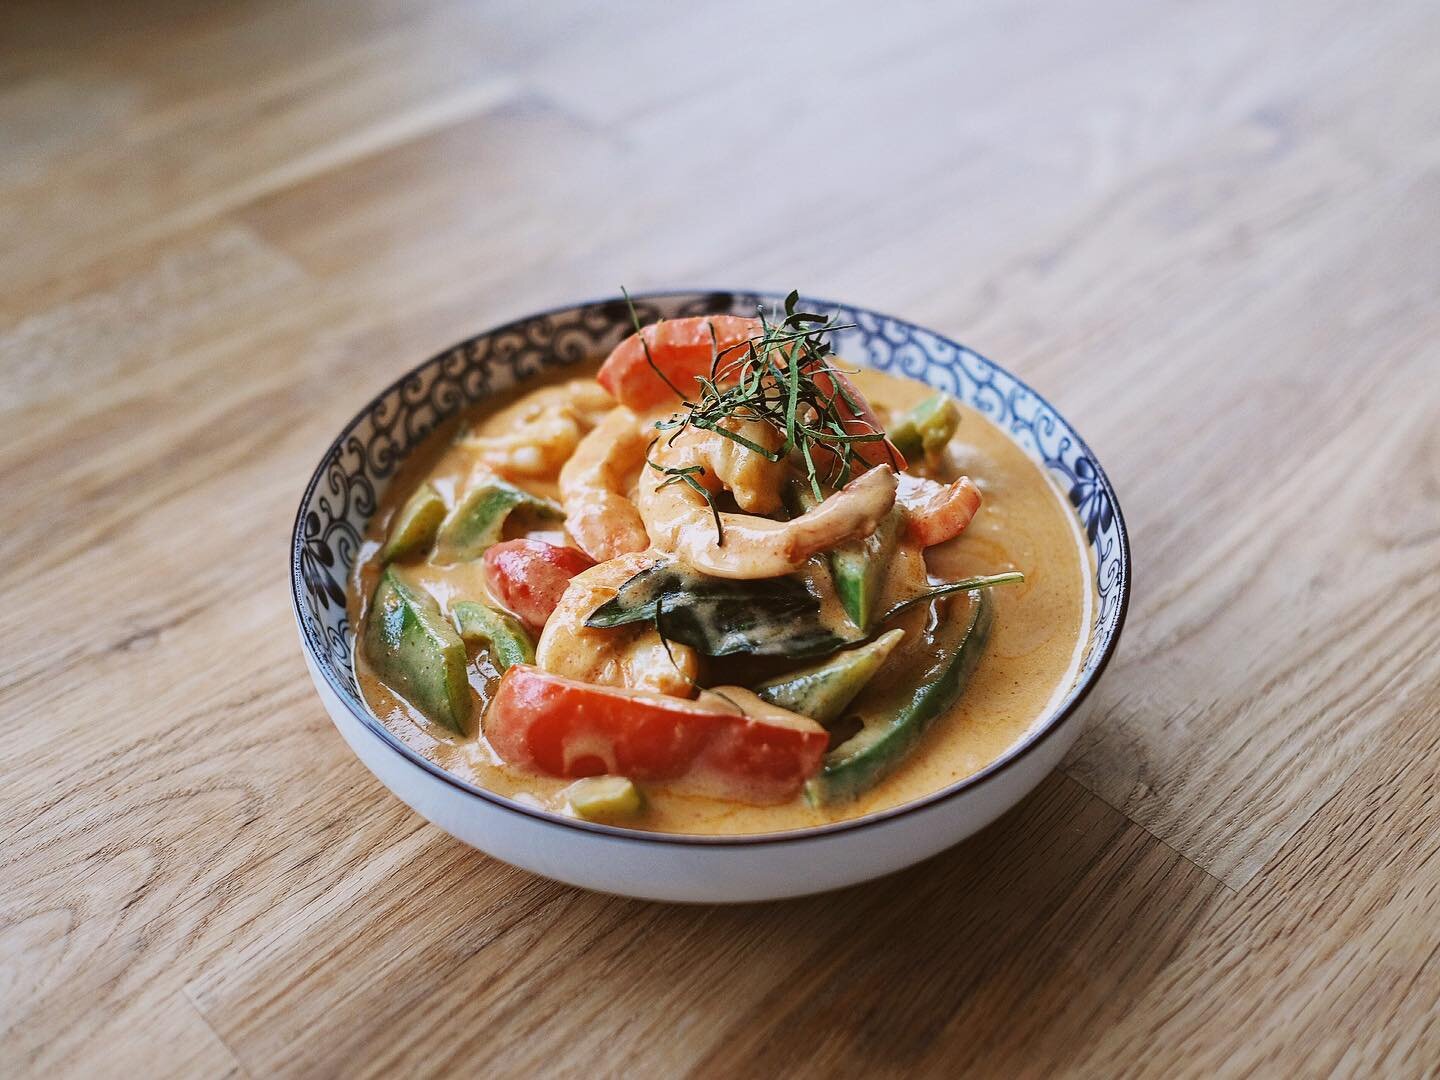 🥄 &lsquo;Panang&rsquo; or thick red Thai curry with kaffir lime flavor.

#malithaifoodyvr #yvrfood #yvrfoodblogger #vancouver #yvr #yvreats #yvrfoodies #thairestaurant #thaifood #thaifoodstagram #thaicuisine #thaicuisines #thaifoodlover